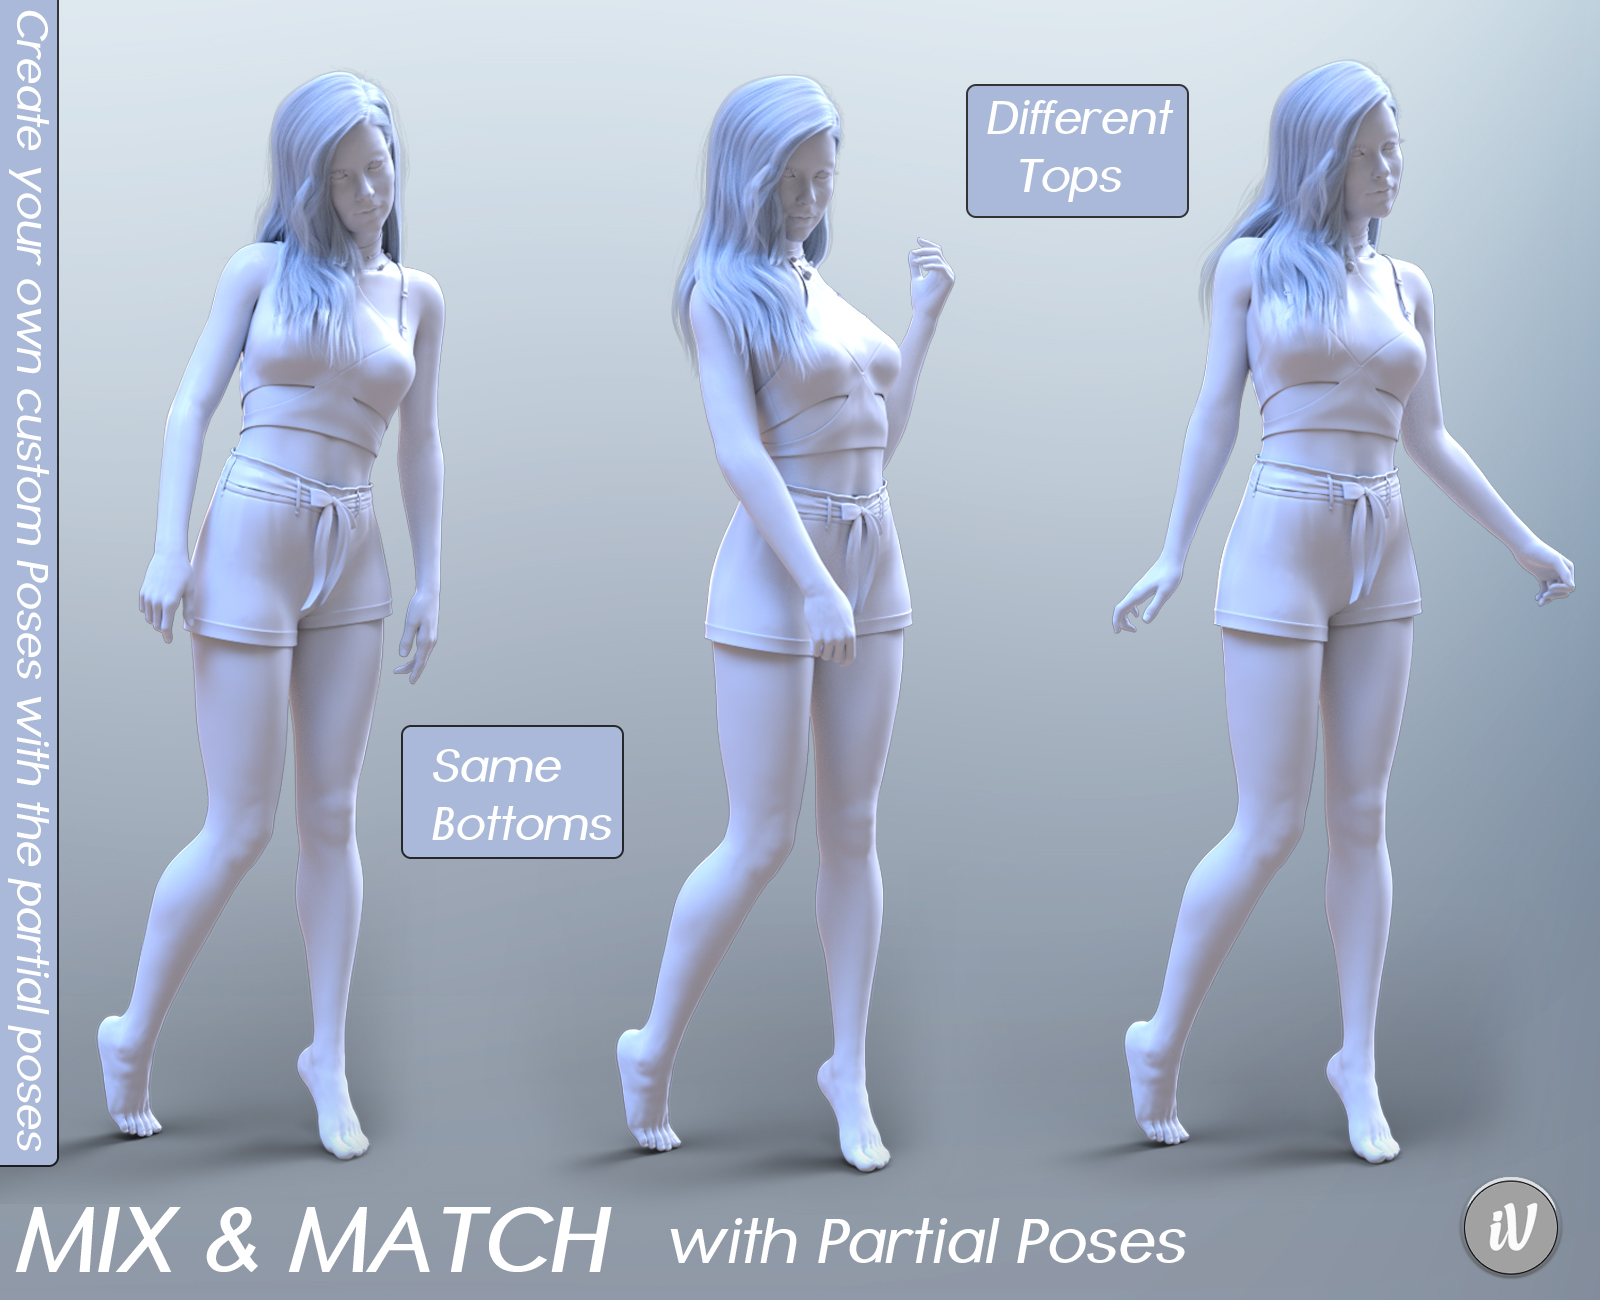 iV Standing Pose Collection Version 2 for Genesis 8 Female(s) by: i3D_LotusValery3D, 3D Models by Daz 3D